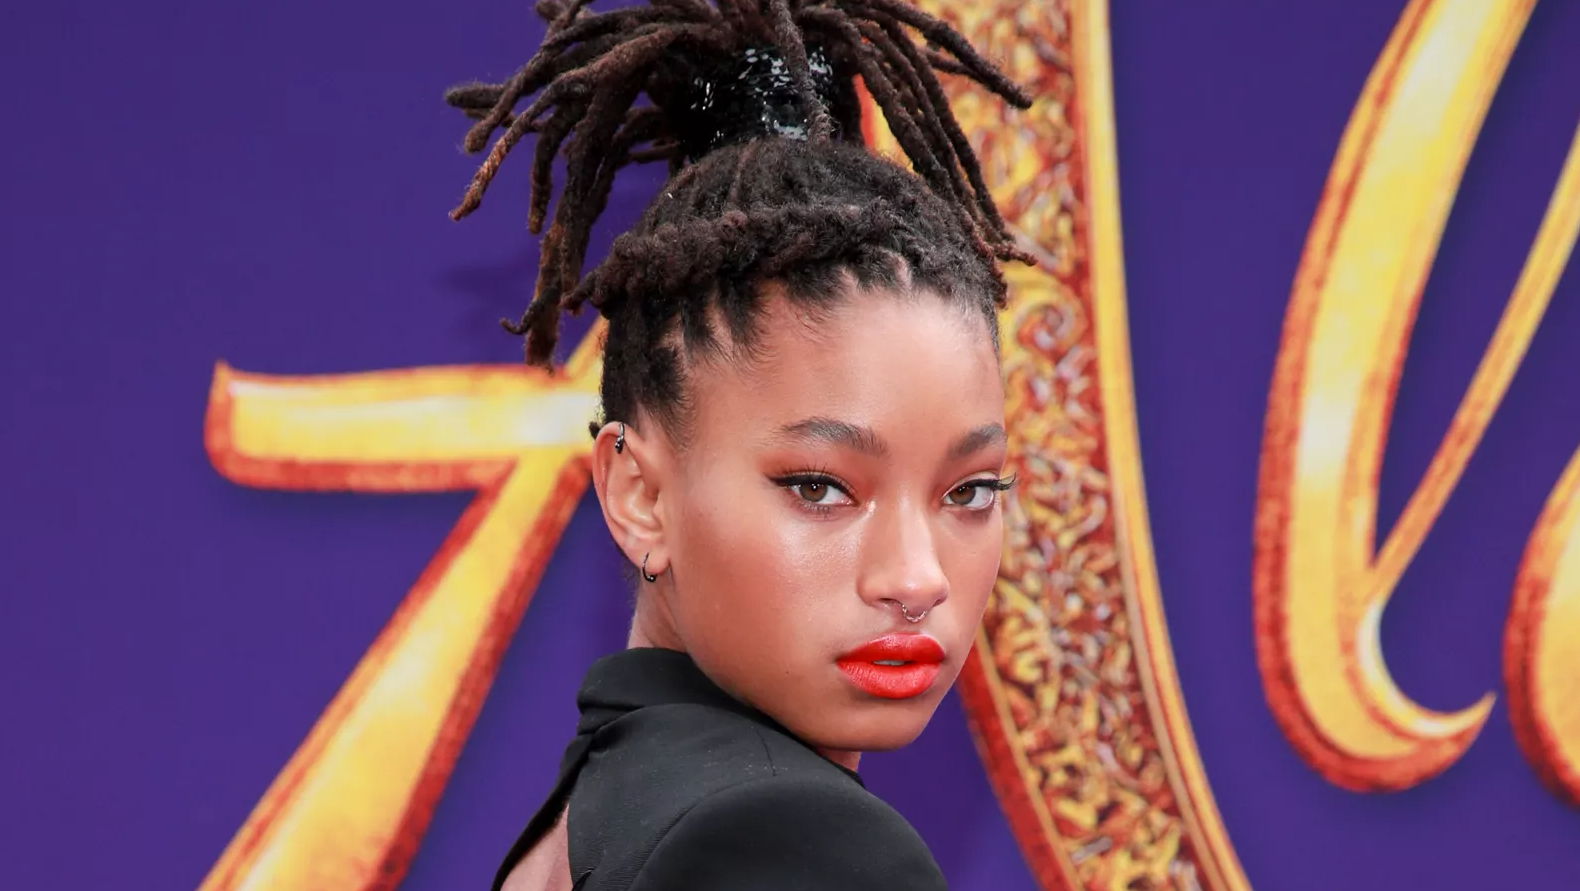 Willow Smith Wows In Yoga Handstand ‘With Wrists Turned Backwards’